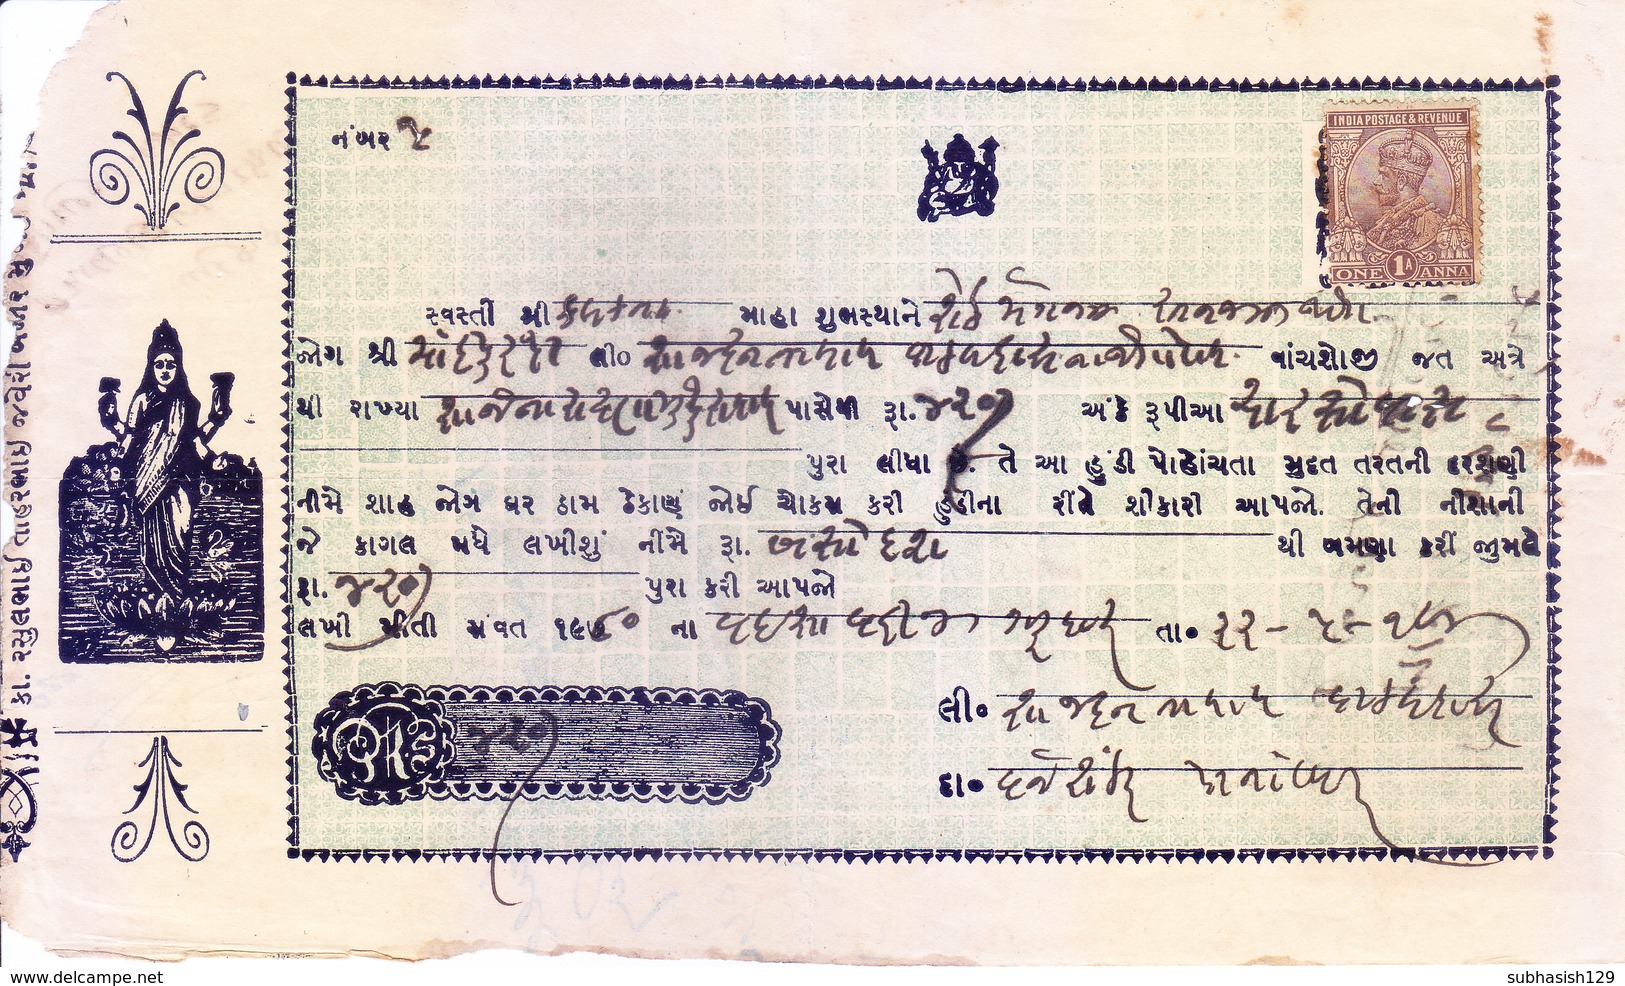 BRITISH INDIA - OLD MONEY RECEIPT IN GUJRATI LANGUAGE - USE OF KING GEORGE V ONE ANNA BROWN REVENUE STAMP - Bills Of Exchange